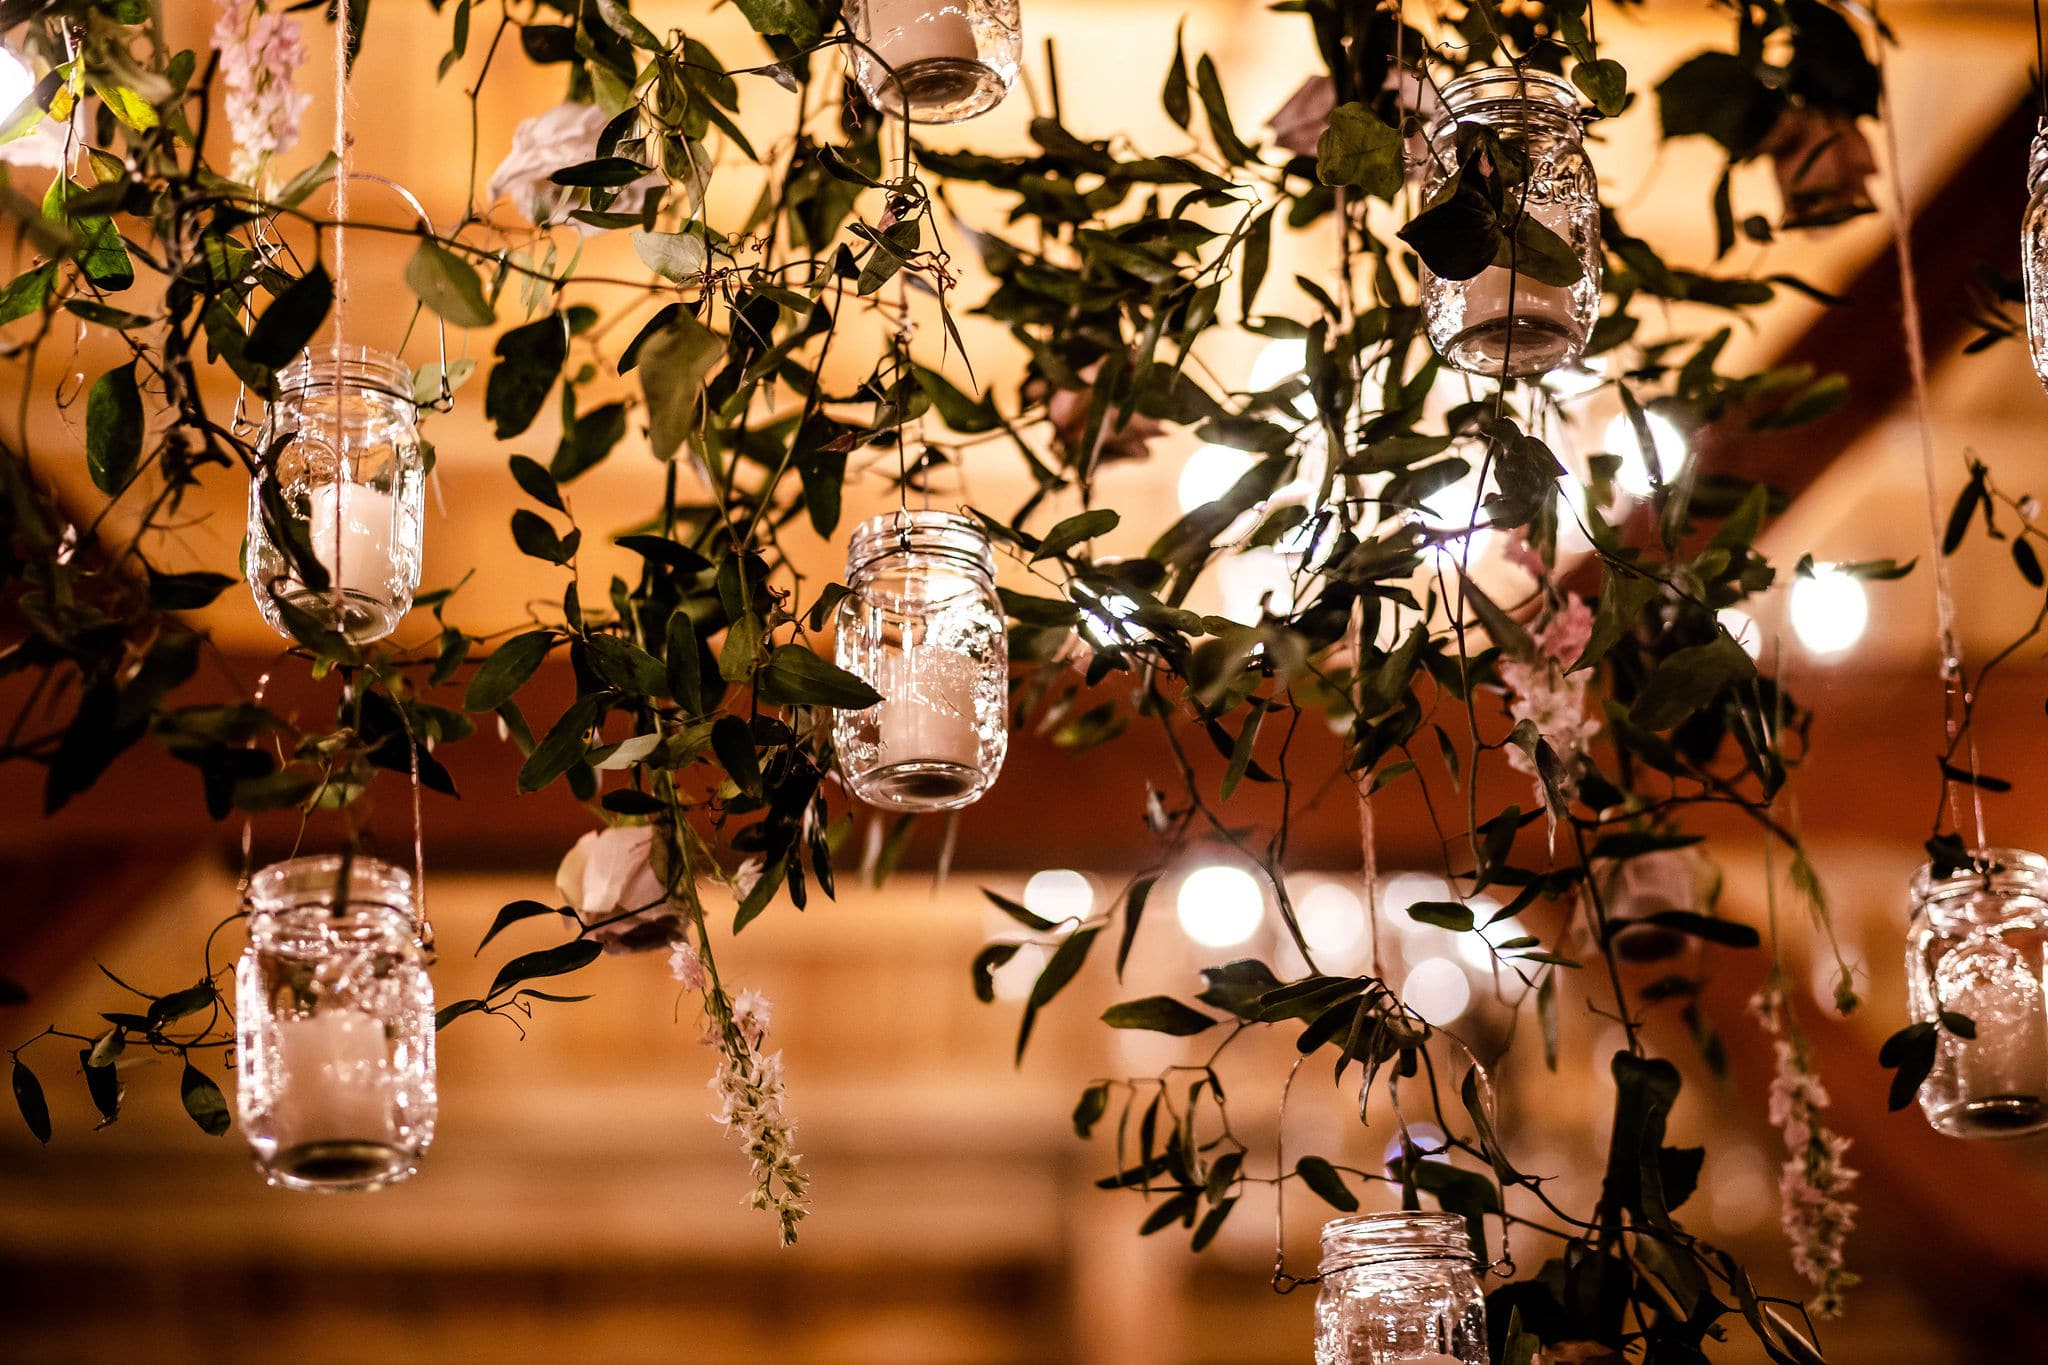 greenery and miniature jars with candles inside hang down from ladder as decoration for ethereal wedding inspiration